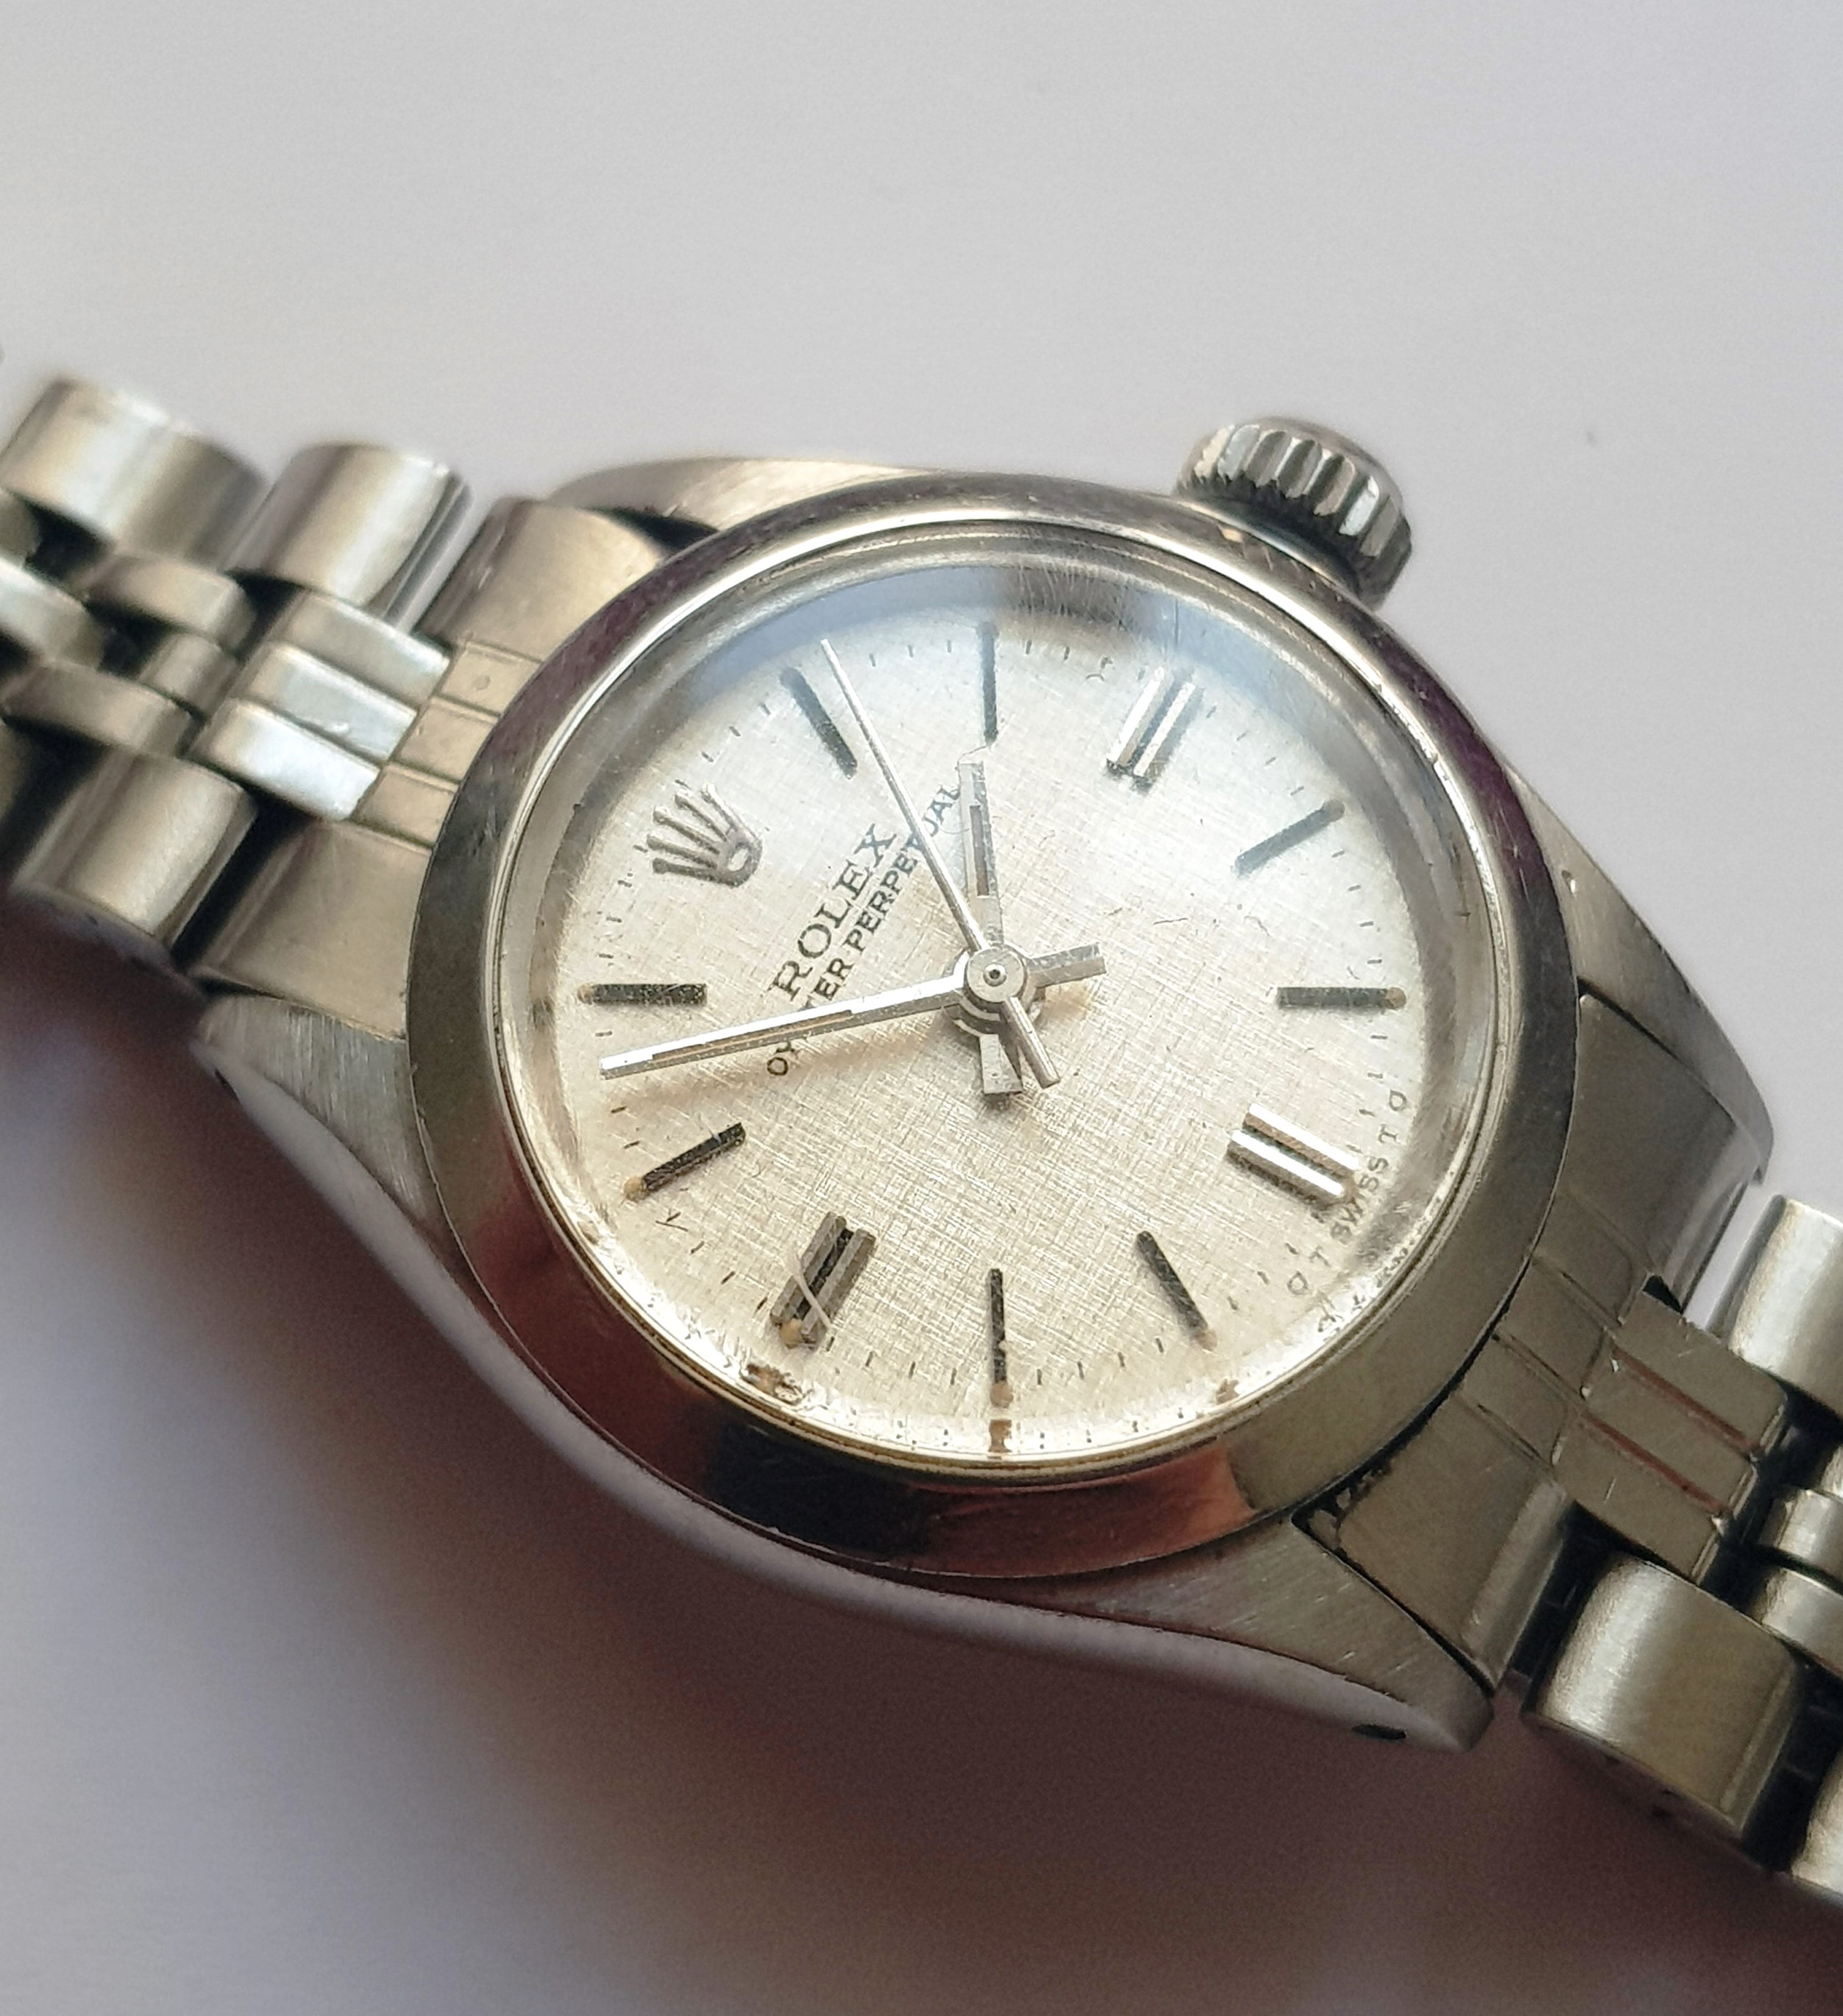 preis rolex oyster perpetual datejust